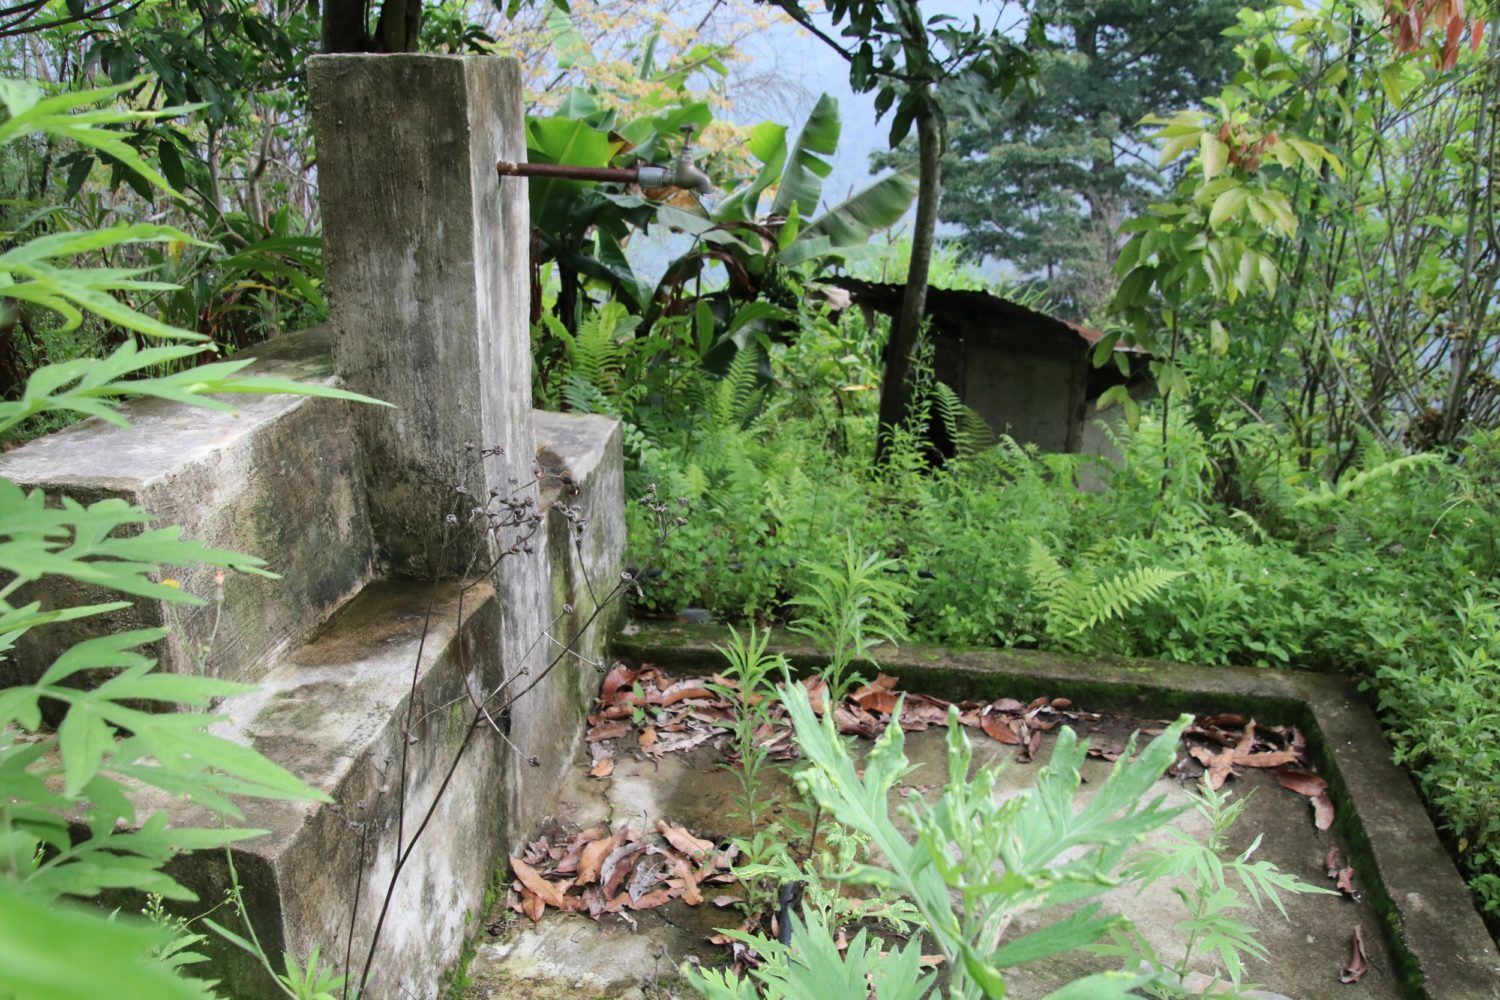 A disused and overgrown water tap near an empty house in Gozhi, Dagana